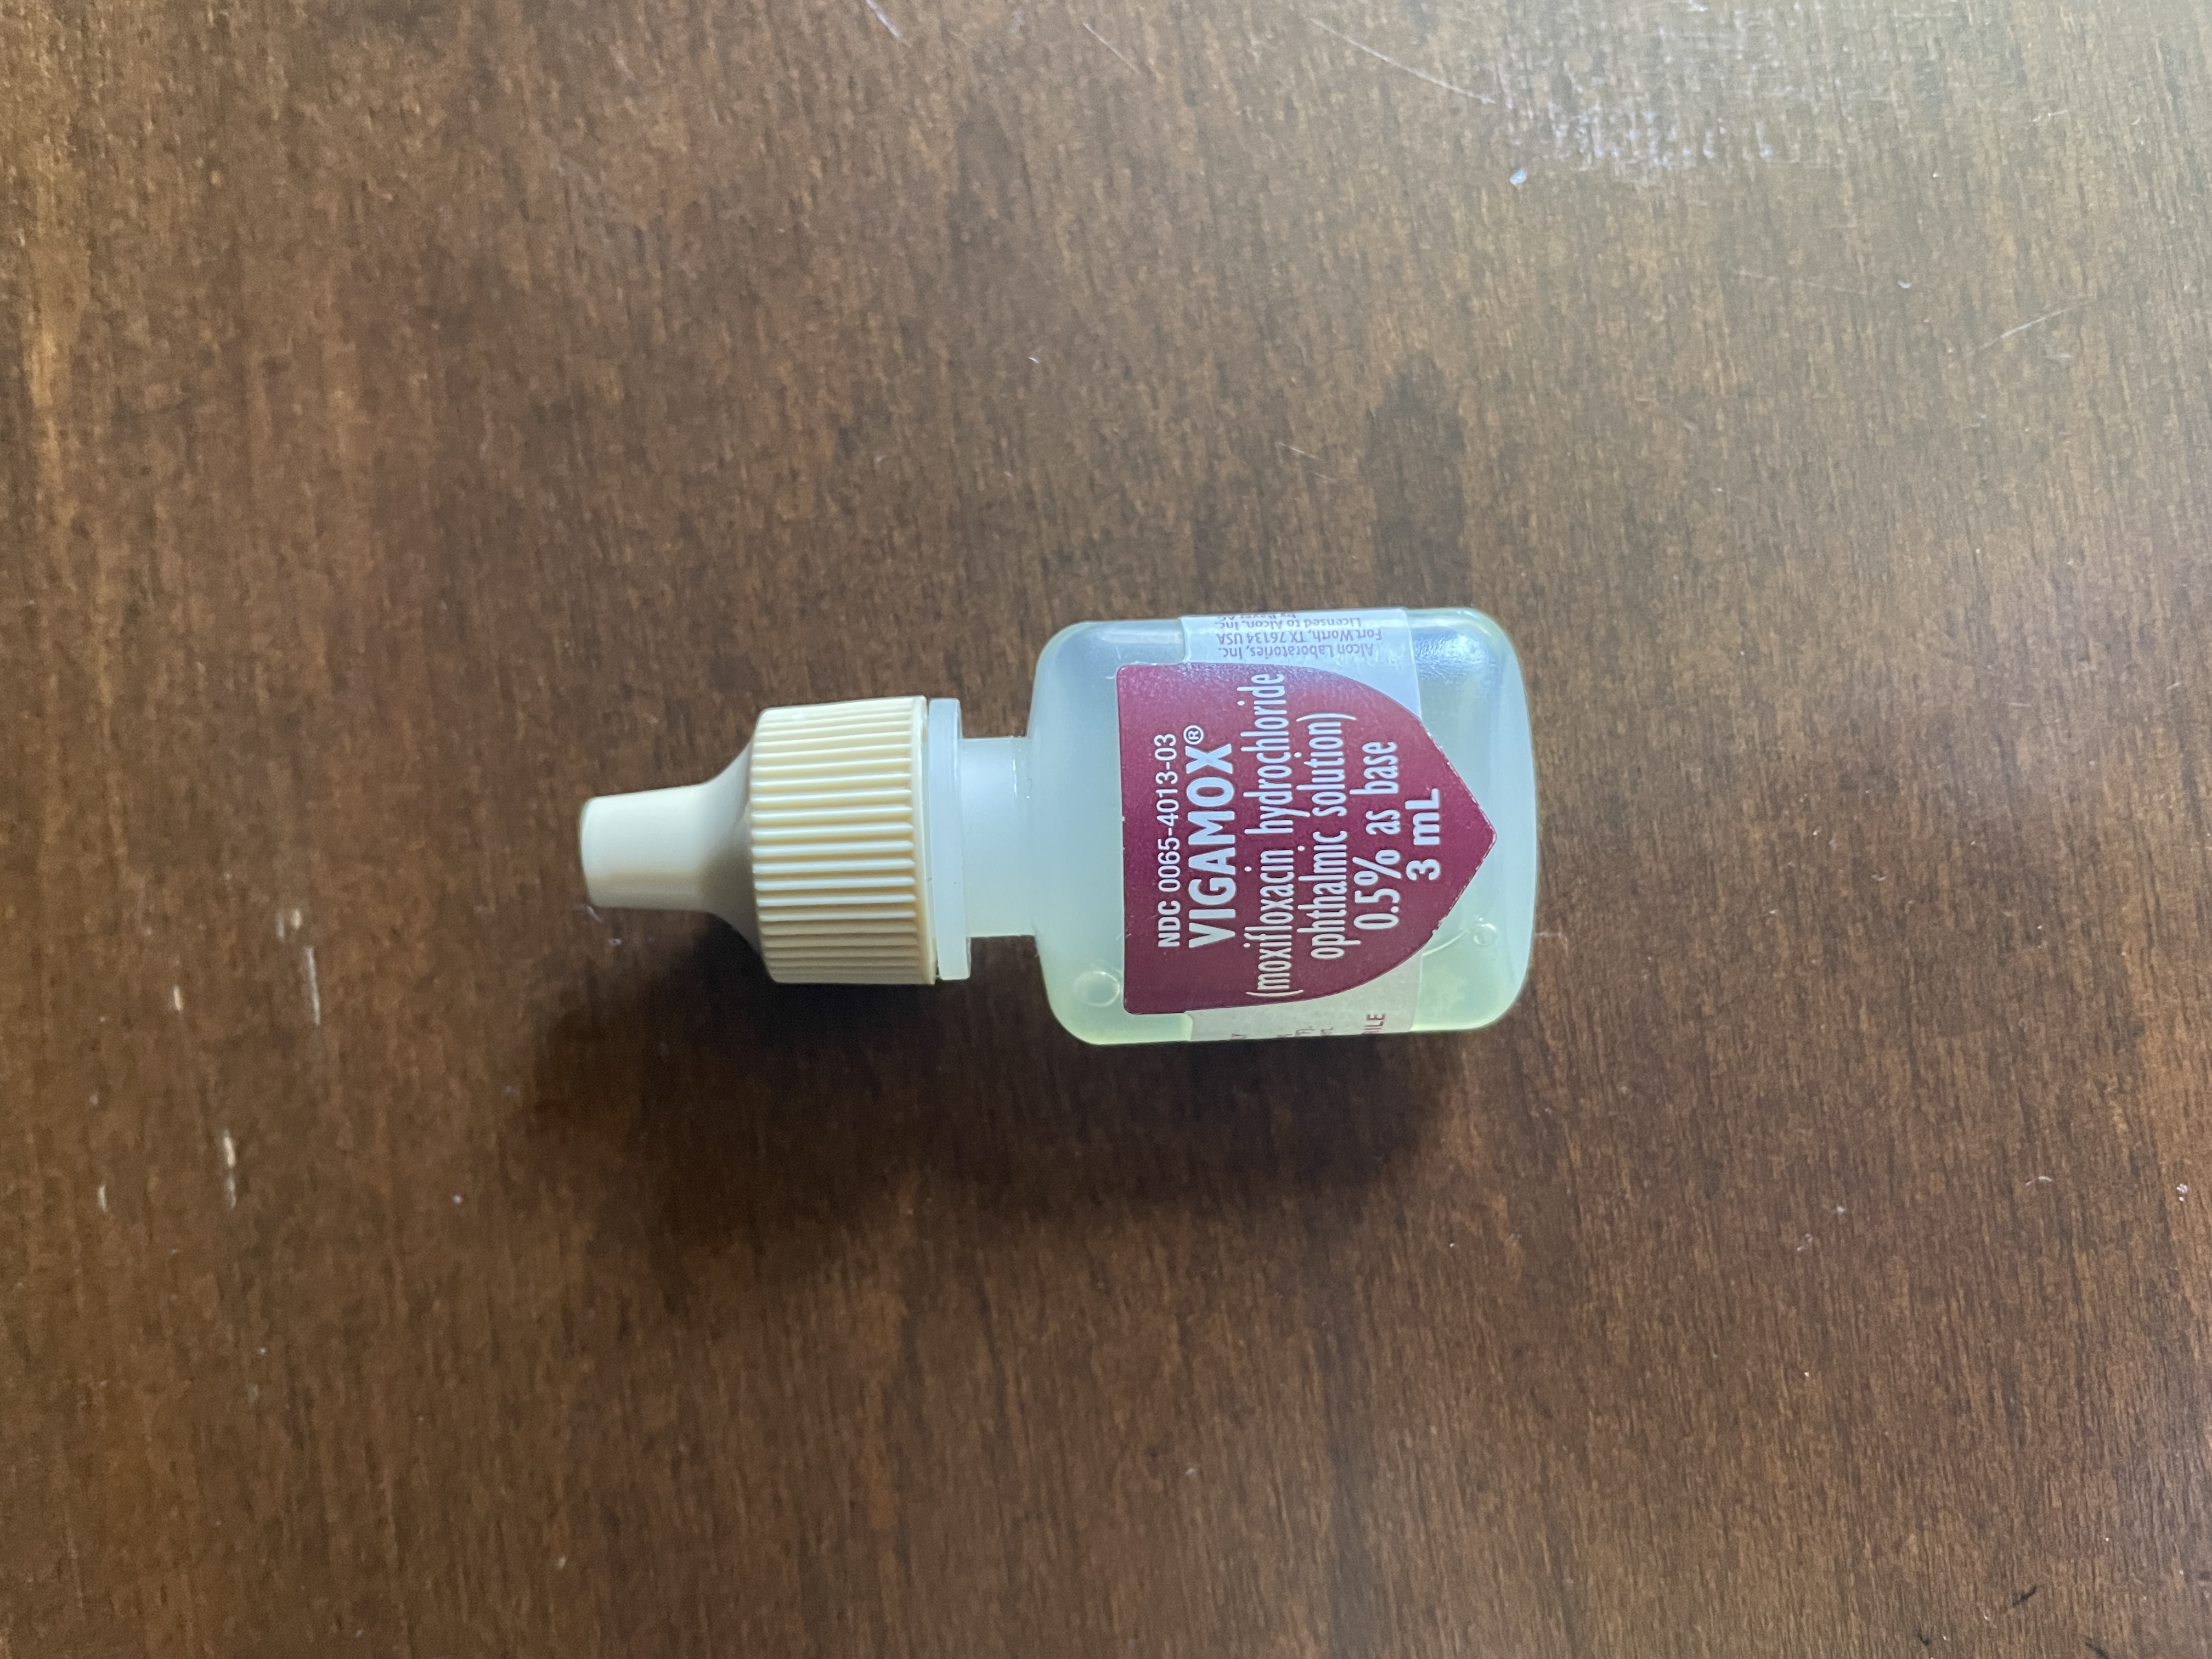 A Vigamox eyedrop bottle on a flat brown surface.